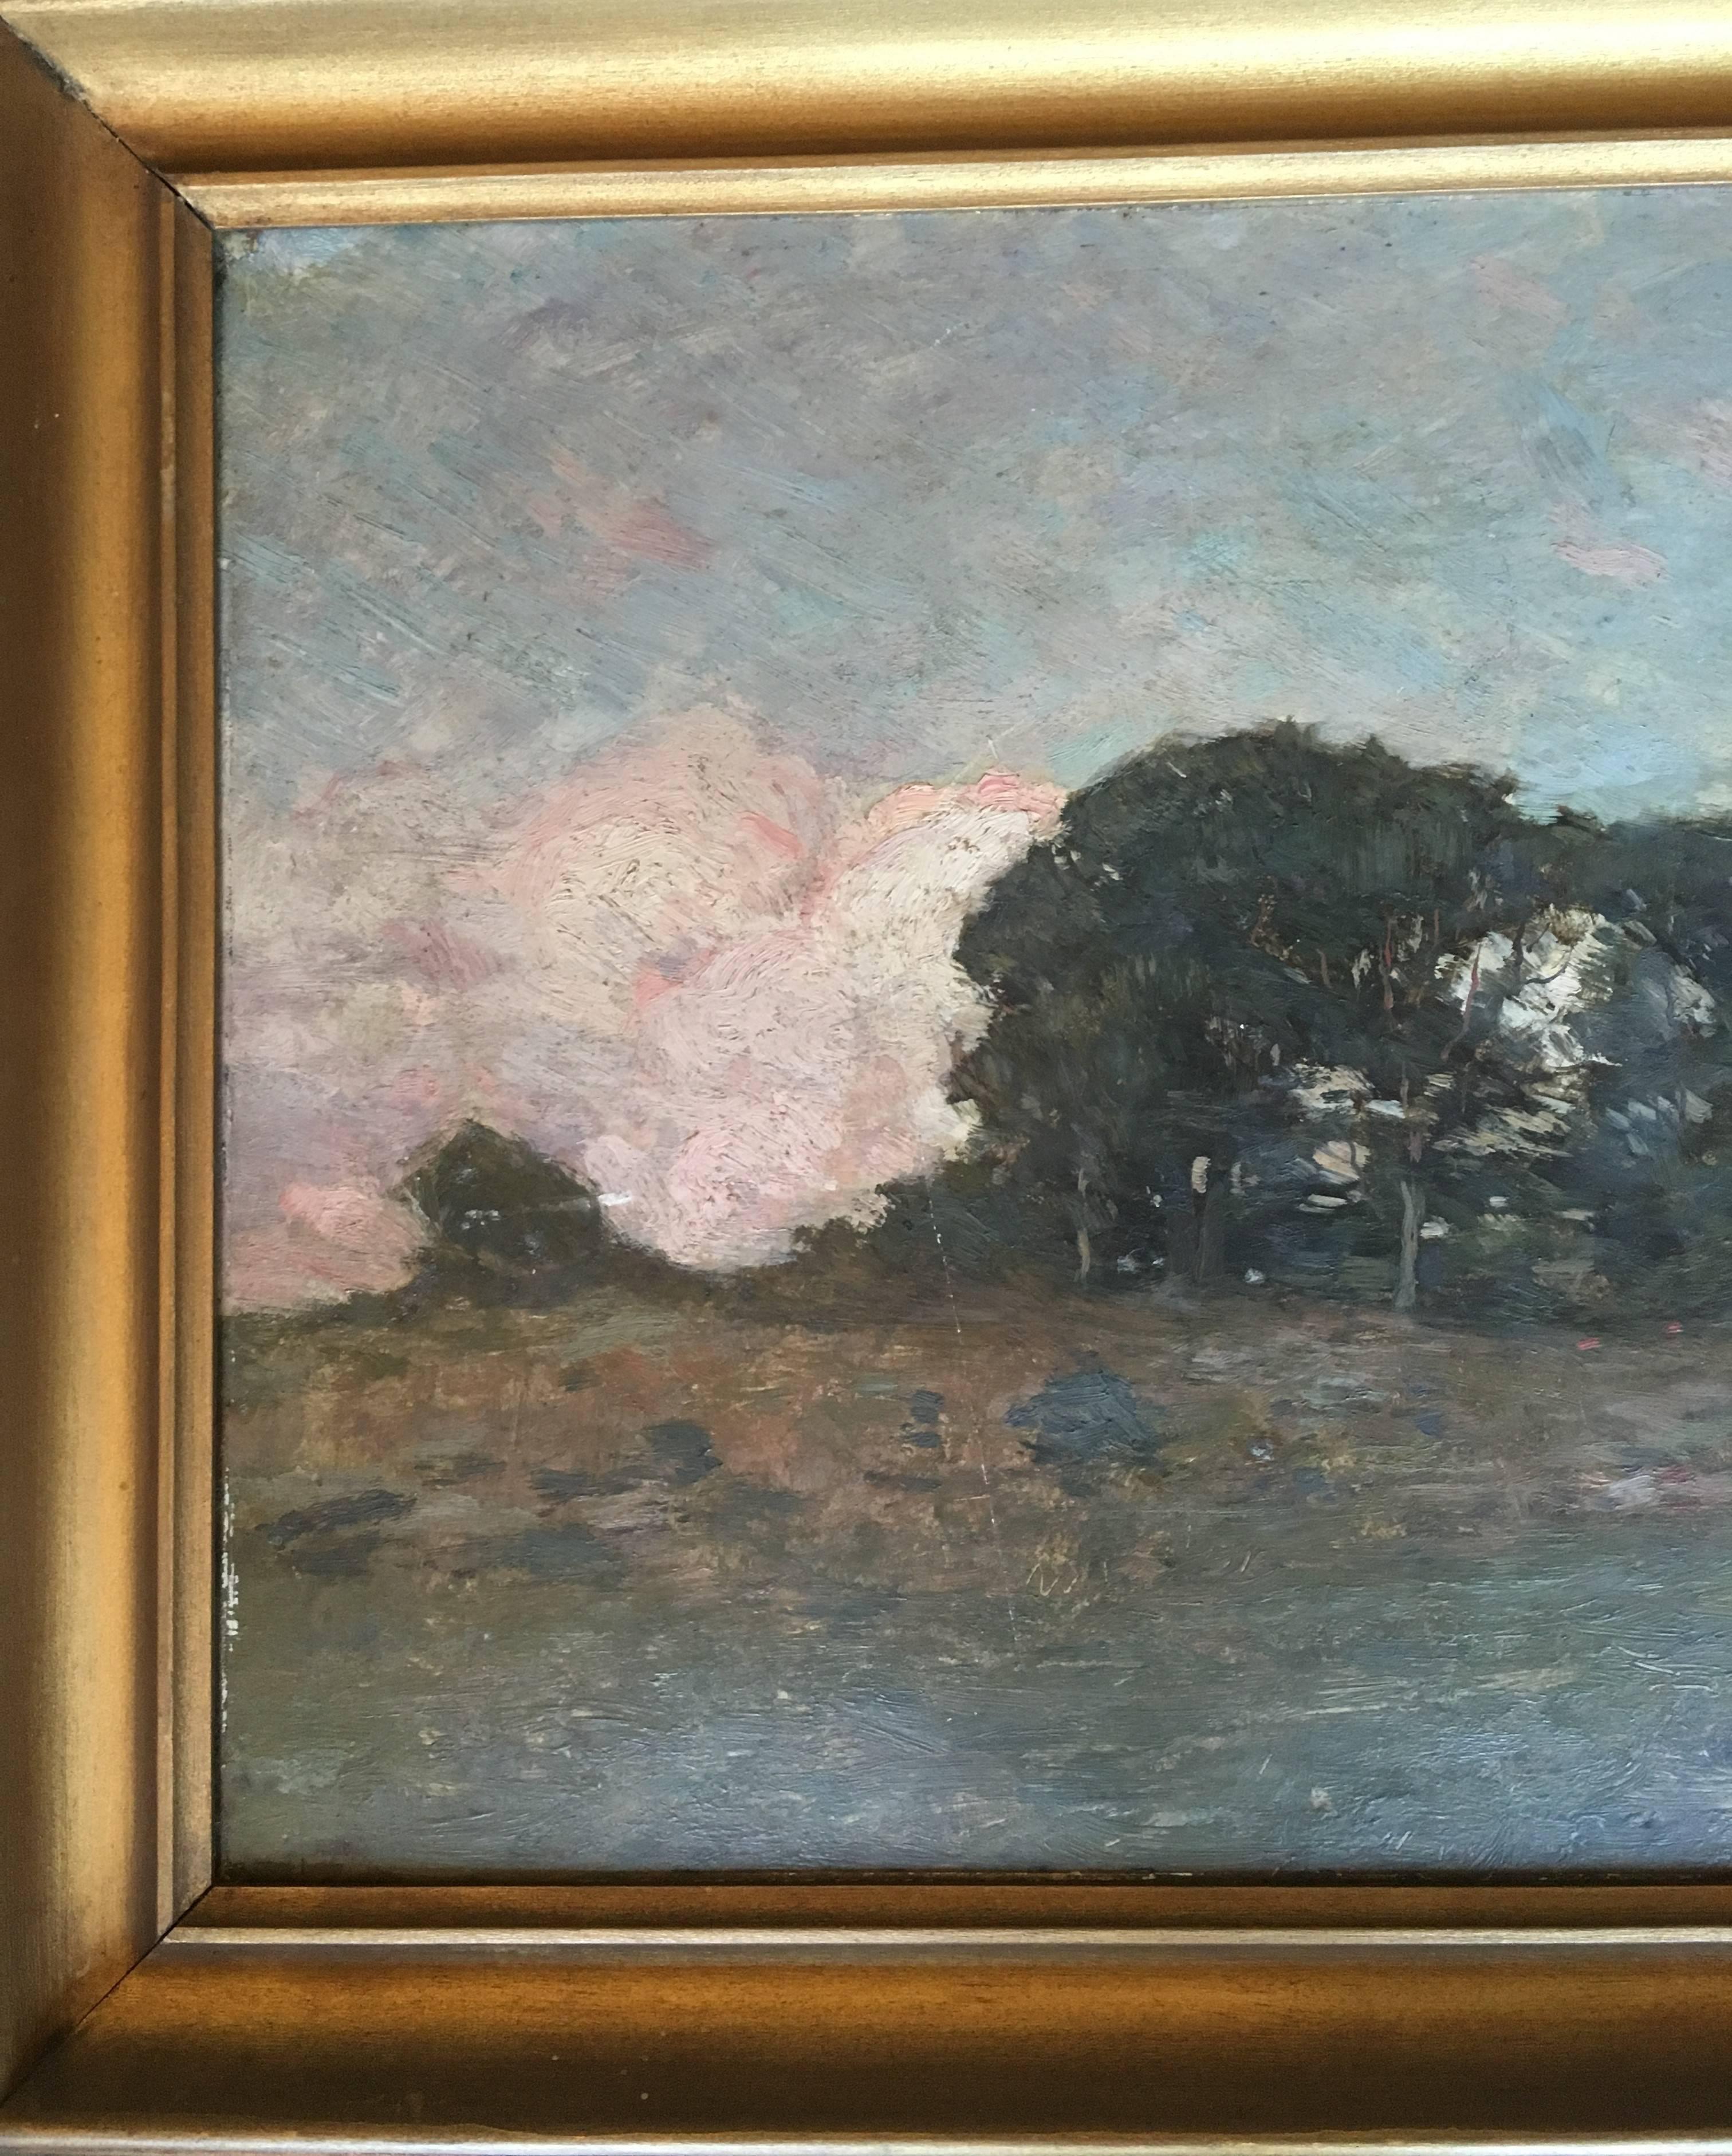 Oil on board plein air landscape painting by Clark G. Voorhees (1871-1933), well-listed artist of the 